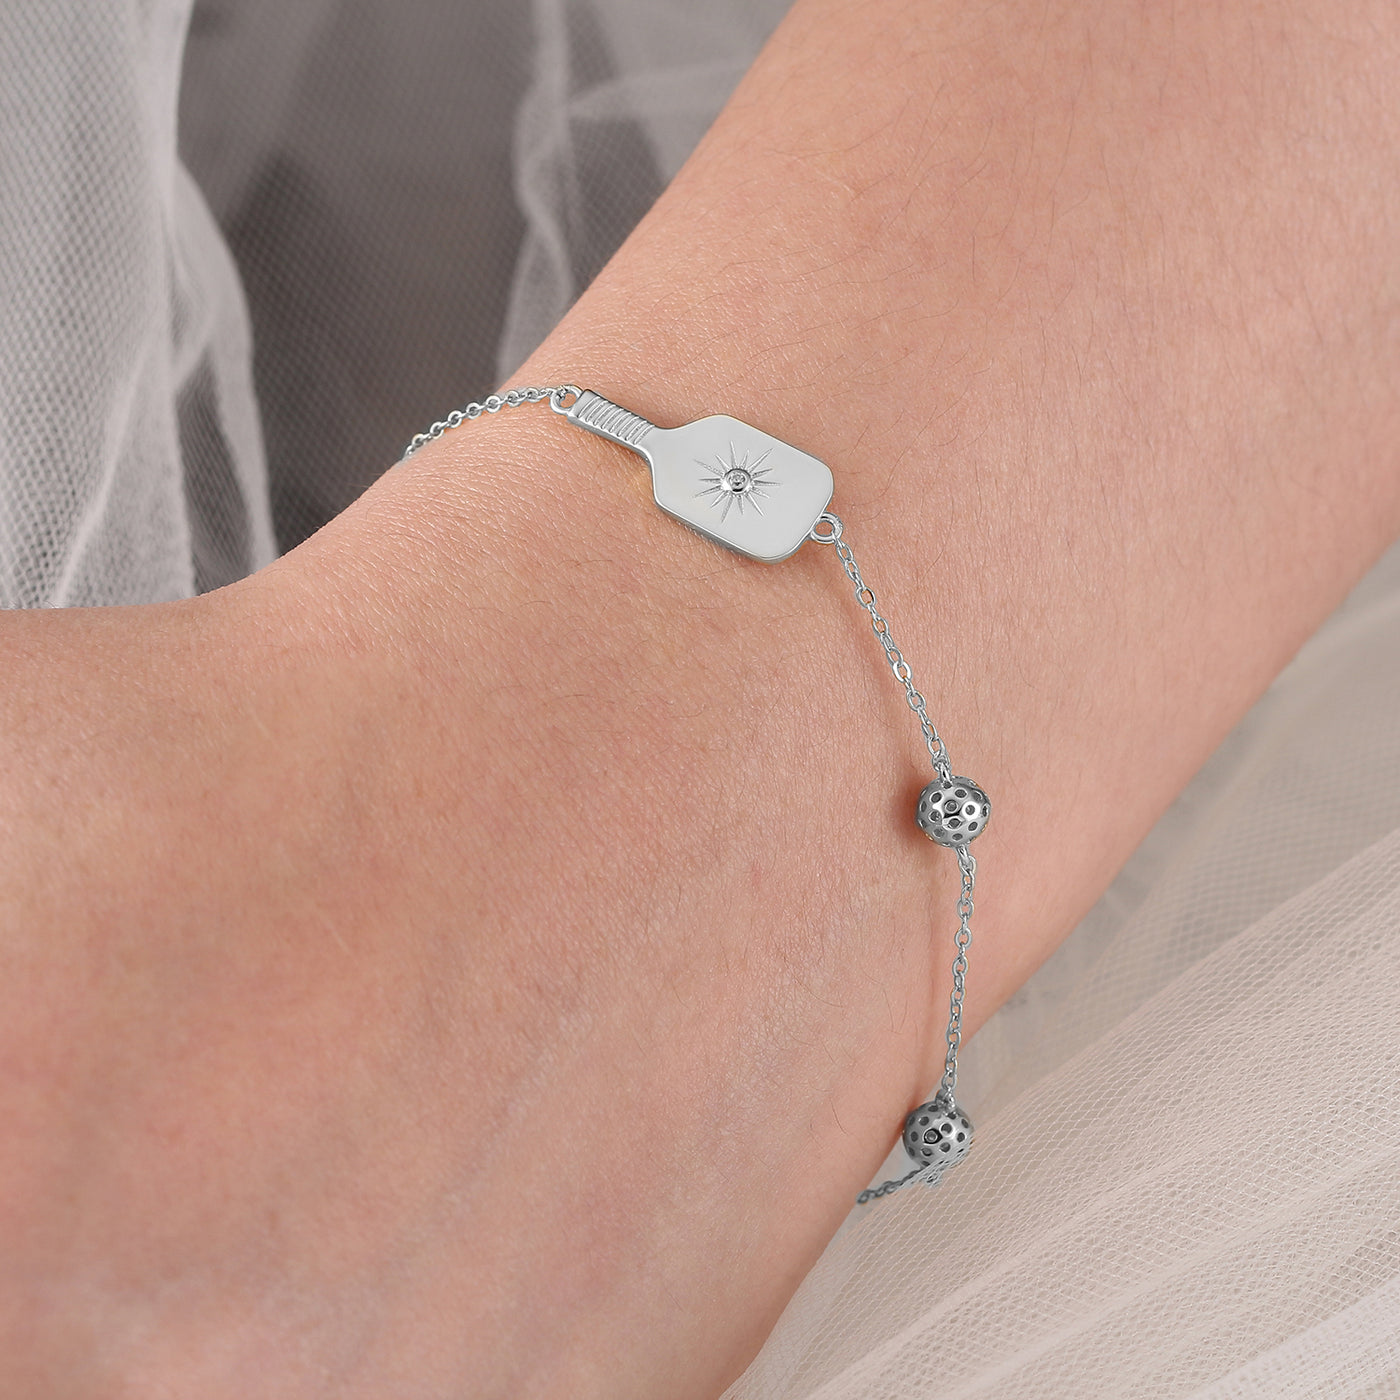 Silver Pickleball Play It Forward Bracelet featuring our "Dainty Dinker" charm front and center with three tiny pickleballs around it. Made from sustainably sourced sterling silver with a protective rhodium plating.